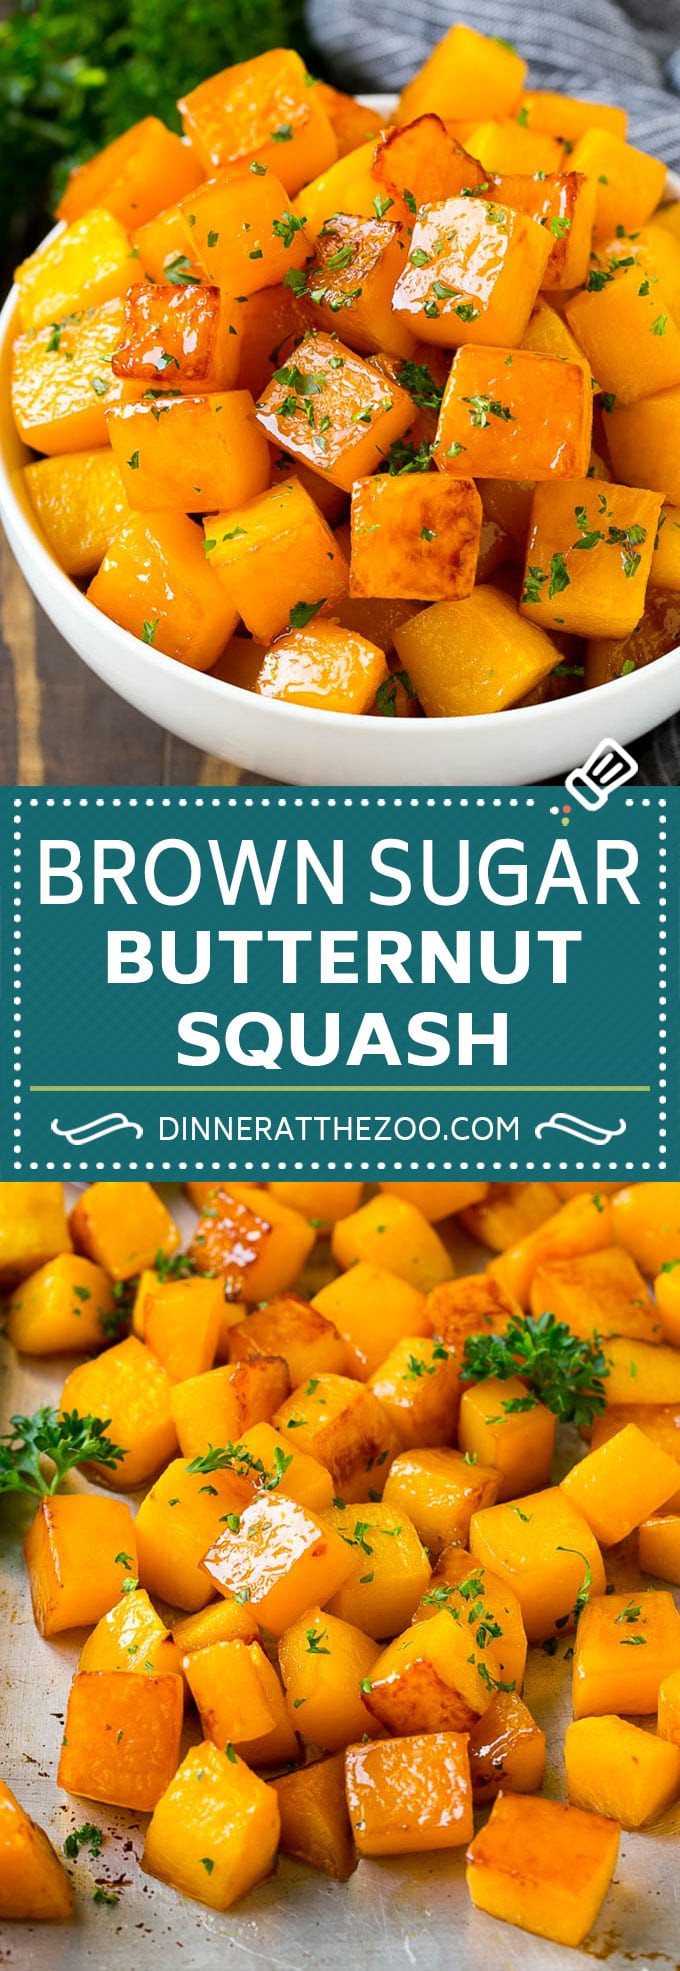 Butternut Squash Dinner Recipes
 Roasted Butternut Squash with Brown Sugar Dinner at the Zoo